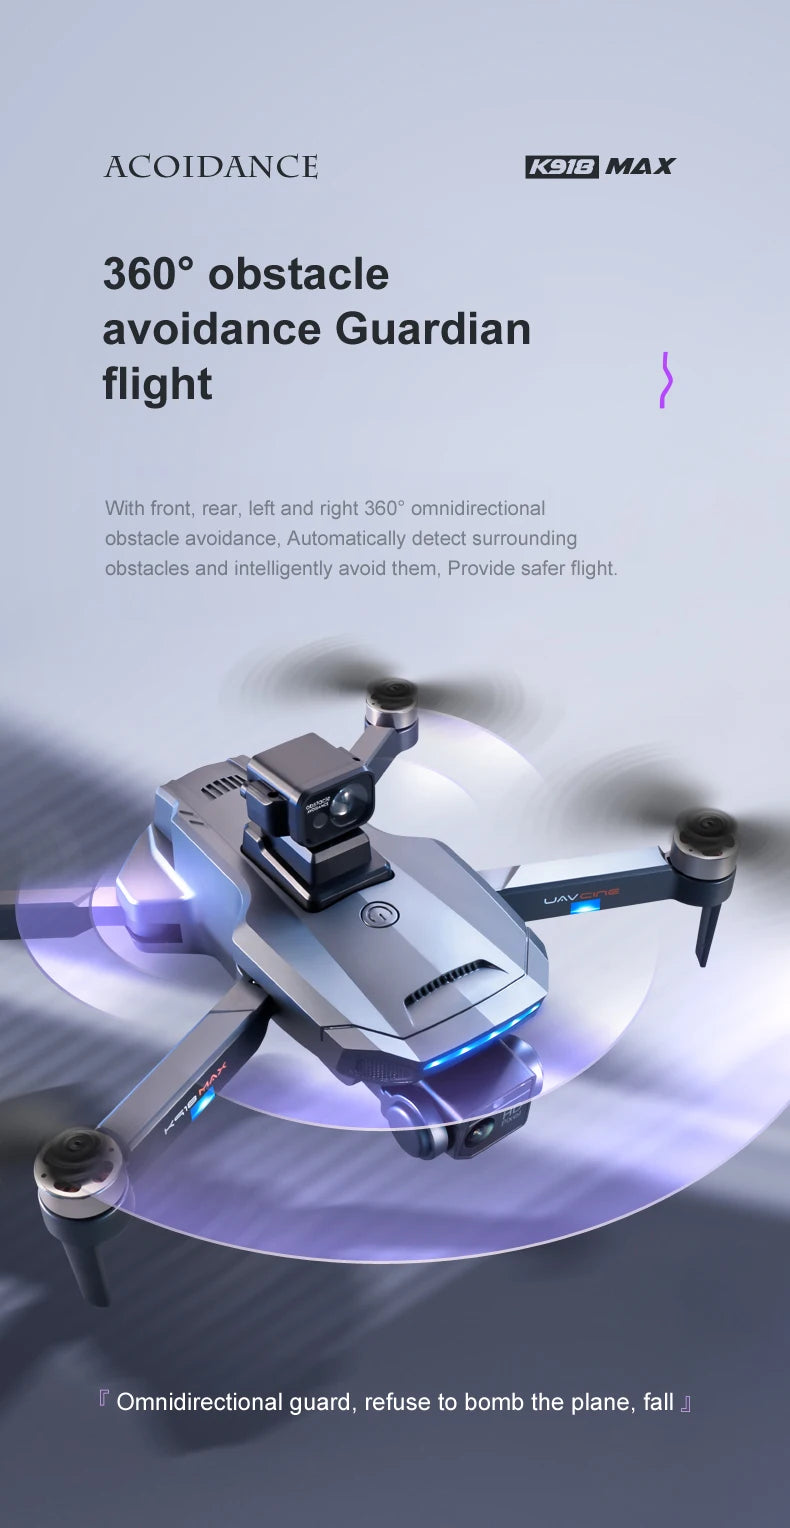 XYRC K918 MAX GPS Drone, ACOIDANCE K91D MAX 3600 obstacle avoidance Guardian flight With front;